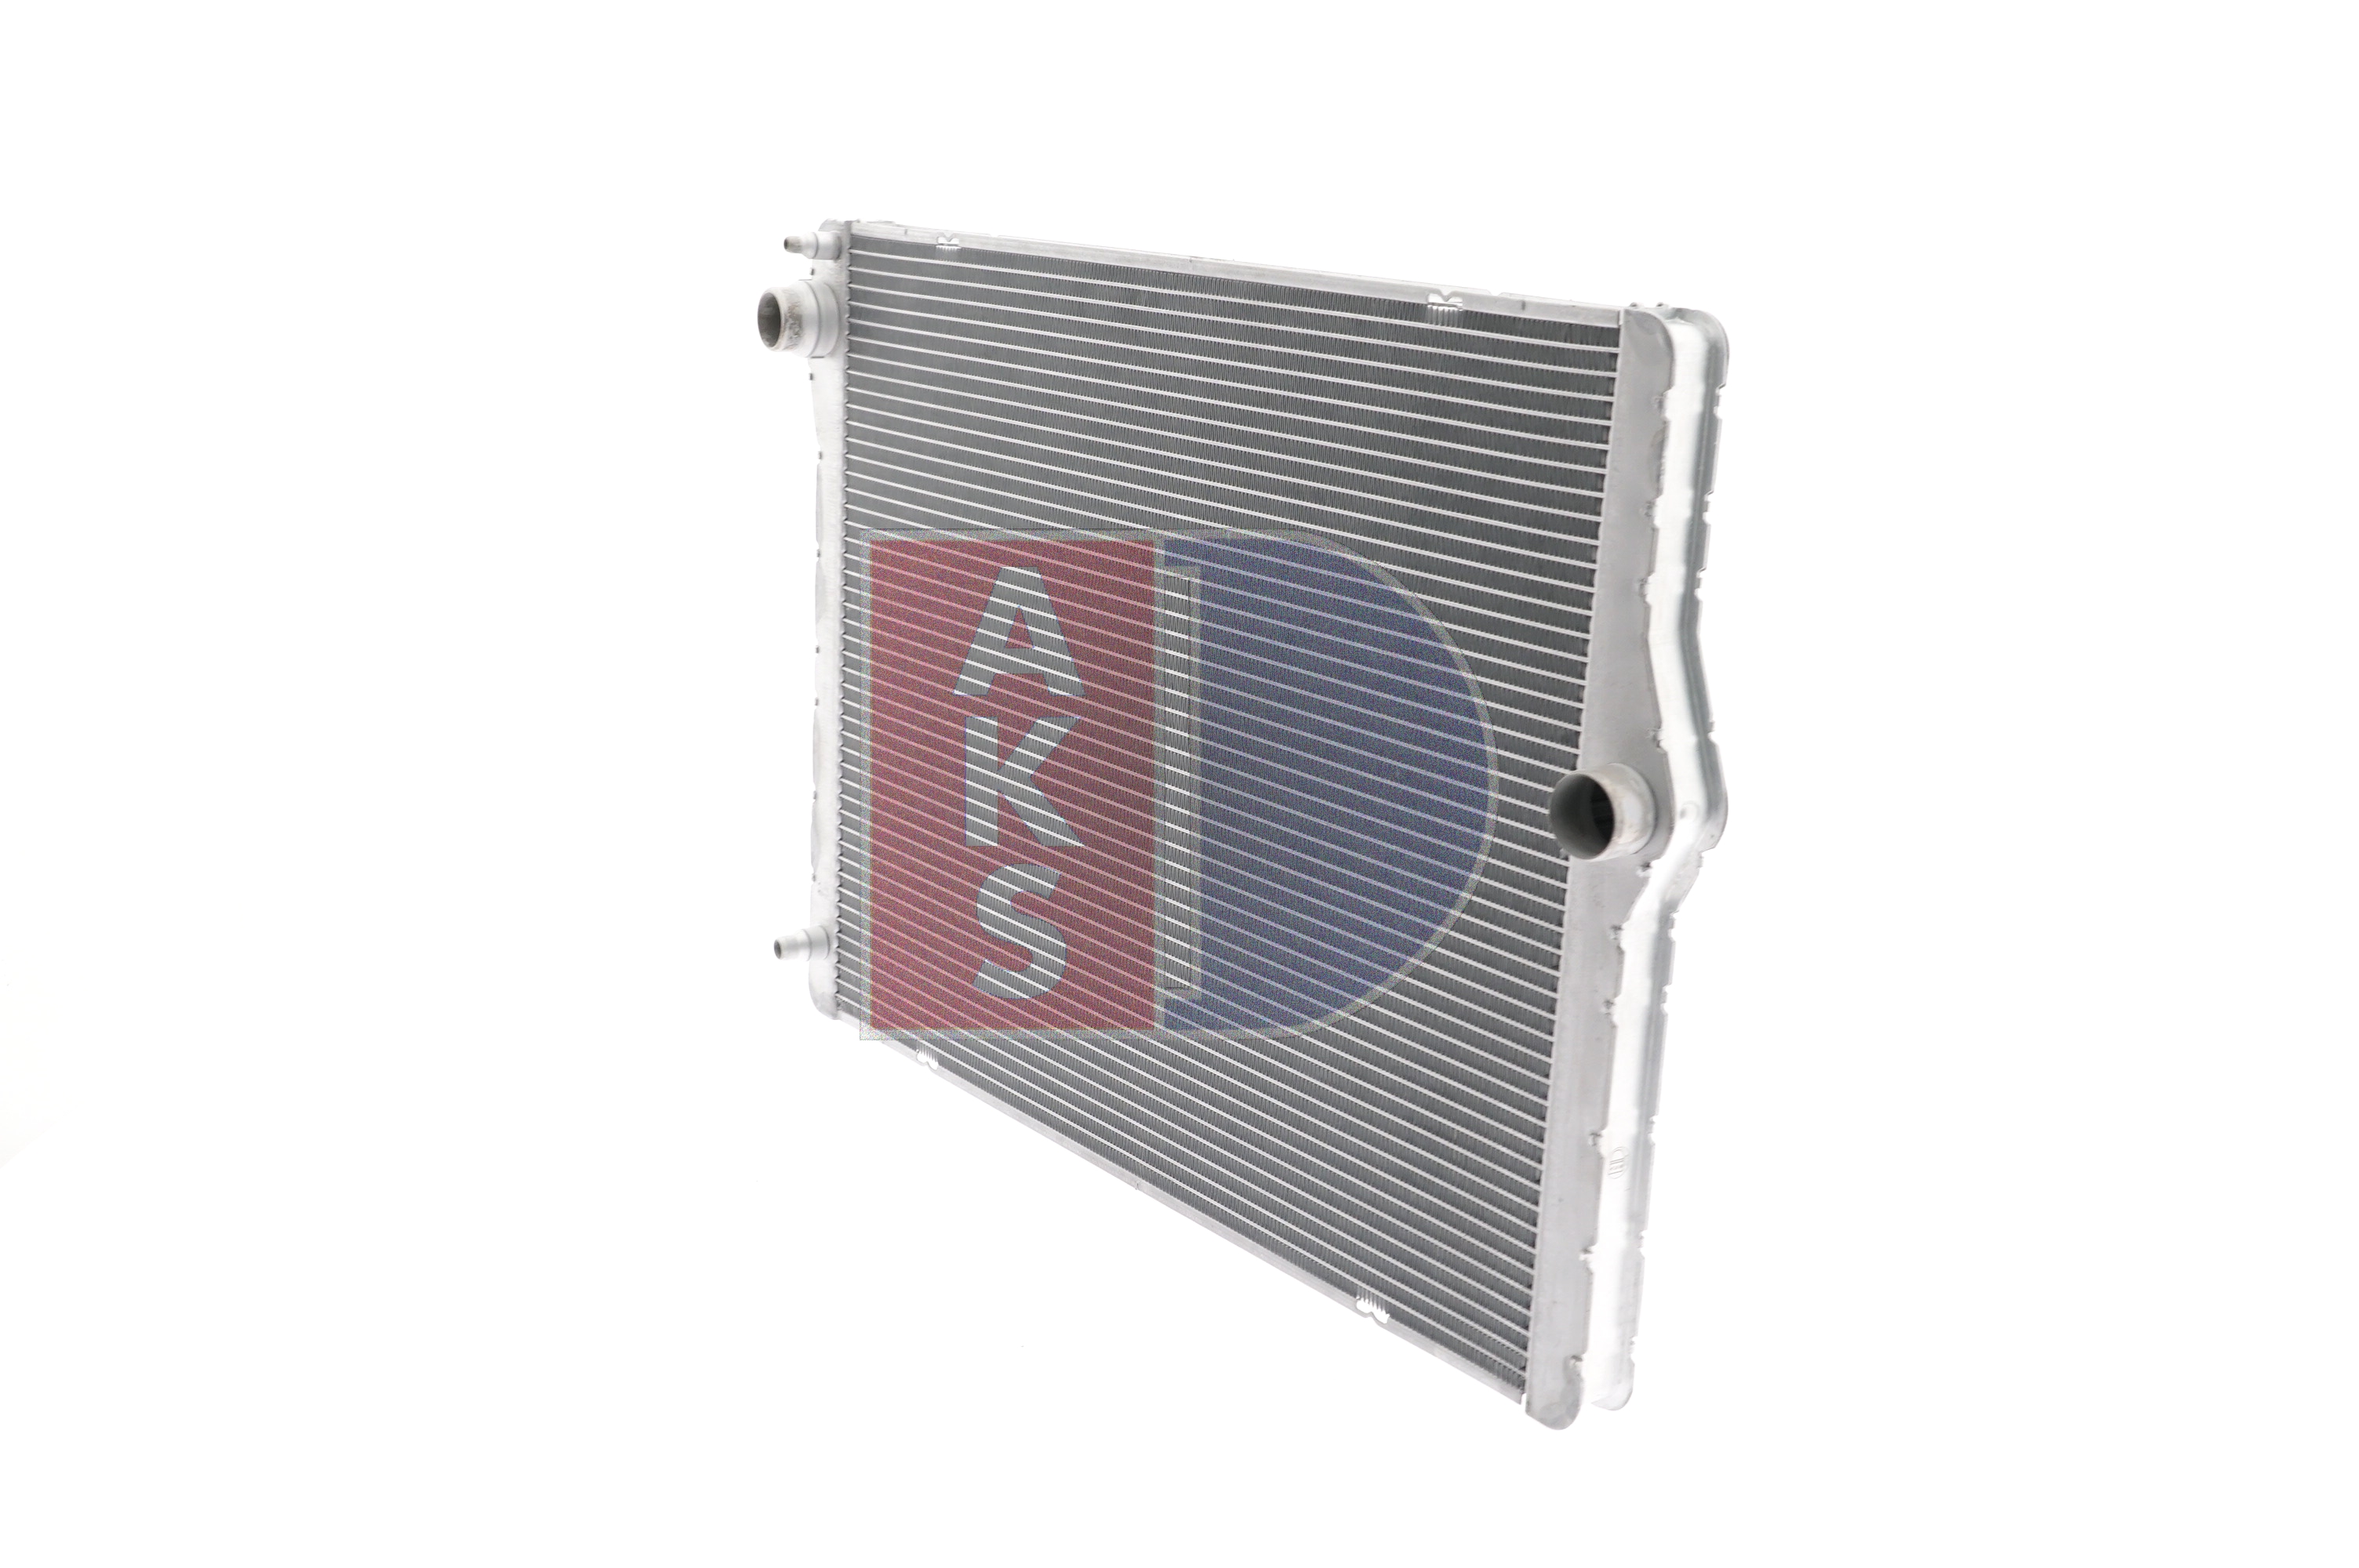 AKS DASIS 050063N Engine radiator for vehicles with/without air conditioning, 607 x 492 x 32 mm, Manual-/optional automatic transmission, Brazed cooling fins